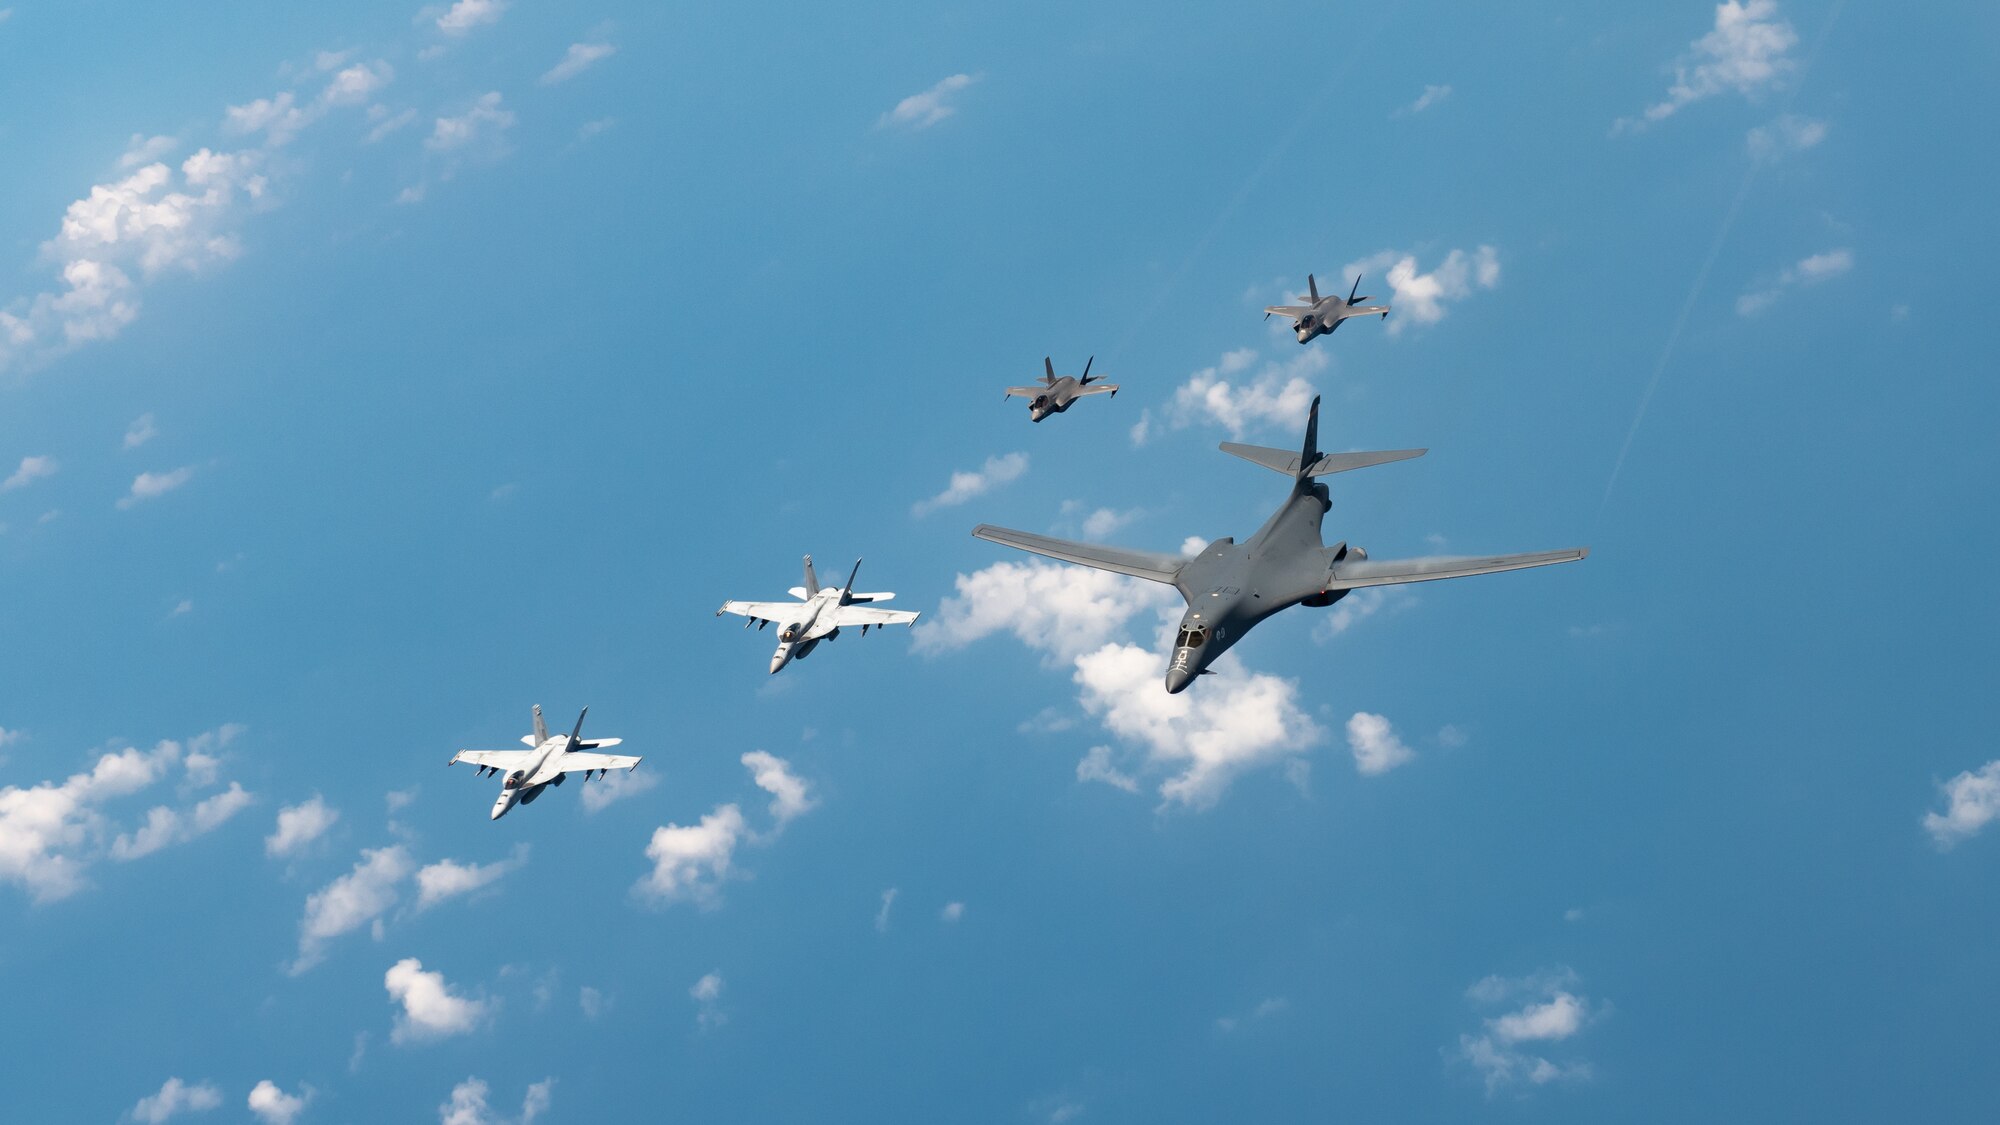 U.S. Navy Carrier Air Wing five F/A-18 Super Hornets, Marine Corps Marine Fighter Attack Squadron 121 F-35 Lightning IIs, all assigned to Marine Corps Air Station Iwakuni, Japan, and a U.S. Air Force 37th Bomb Squadron B-1B Lancer assigned to Ellsworth Air Force Base, S.D., conduct a large-scale joint and bilateral integration training exercise Aug. 18, 2020. Four B-1B Lancers, two B-2 Spirit Stealth Bombers, and four F-15C Eagles conducted Bomber Task Force missions simultaneously within the Indo-Pacific region over the course of 24 hours. Pacific Air Forces routinely conducts BTF operations to show the United States’ commitment to allies and partners in the Indo-Pacific area of responsibility. (U.S. Air Force photo by Staff Sgt. Peter Reft)